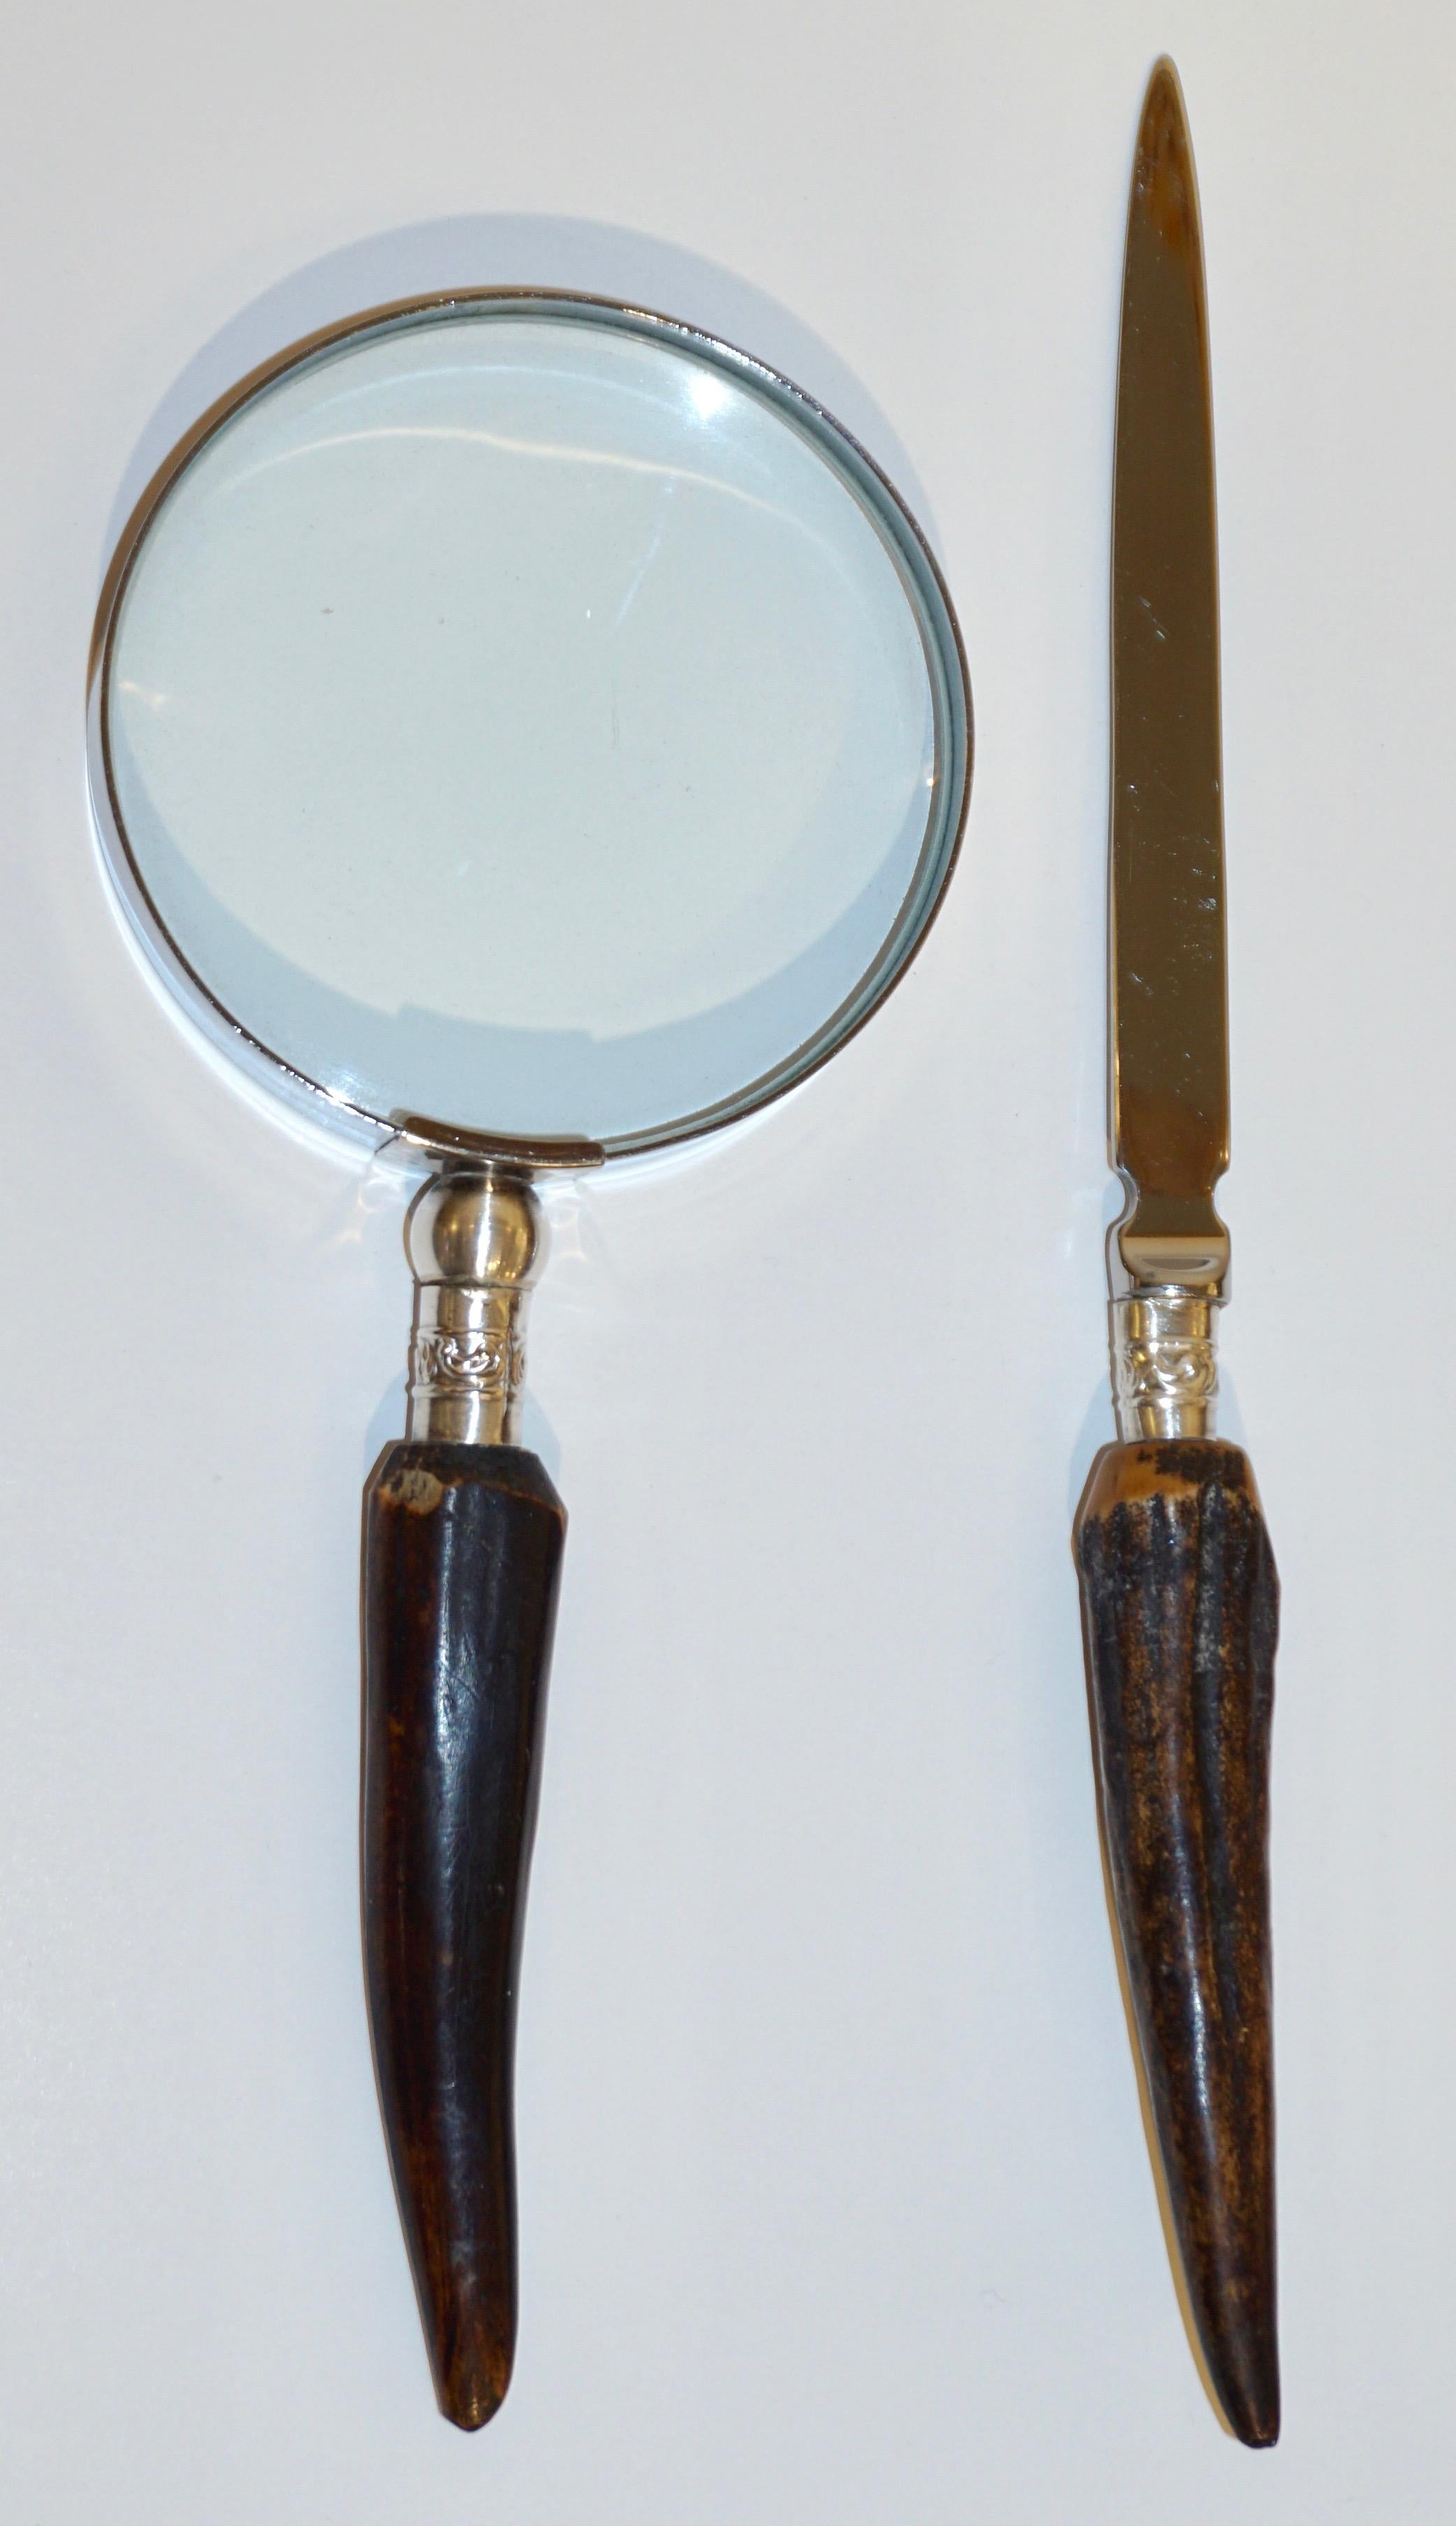 A vintage Mid-Century Modern set composed of a magnifying glass and a letter opener with antler handles mounted with a hand-crafted sterling silver decor supporting the stainless steel glass rim and blade.
Can be purchased individually:
magnifier